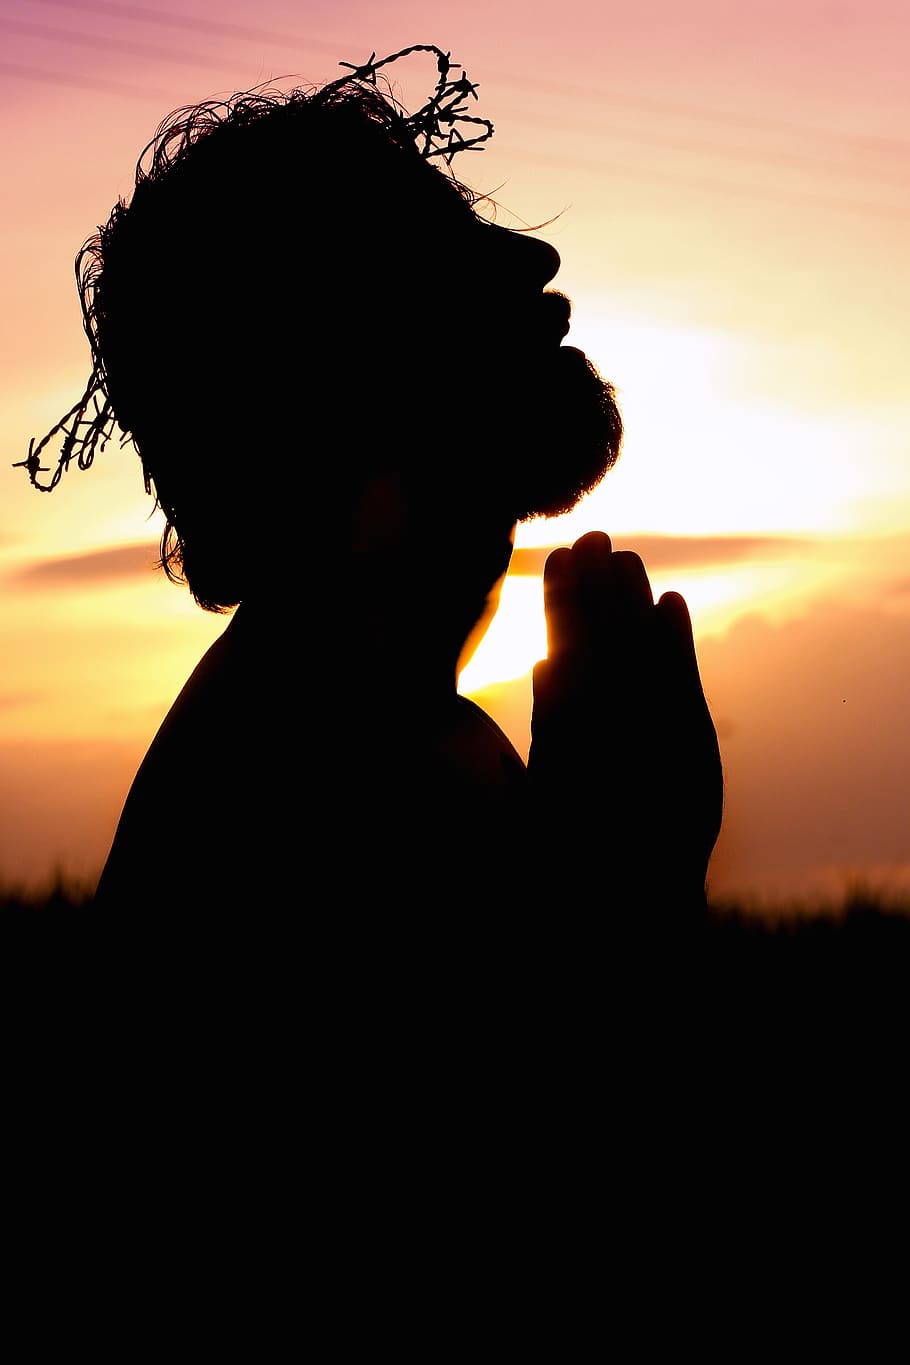 HD wallpaper: Silhouette Image of Person Praying, adult, background,  backlit | Wallpaper Flare